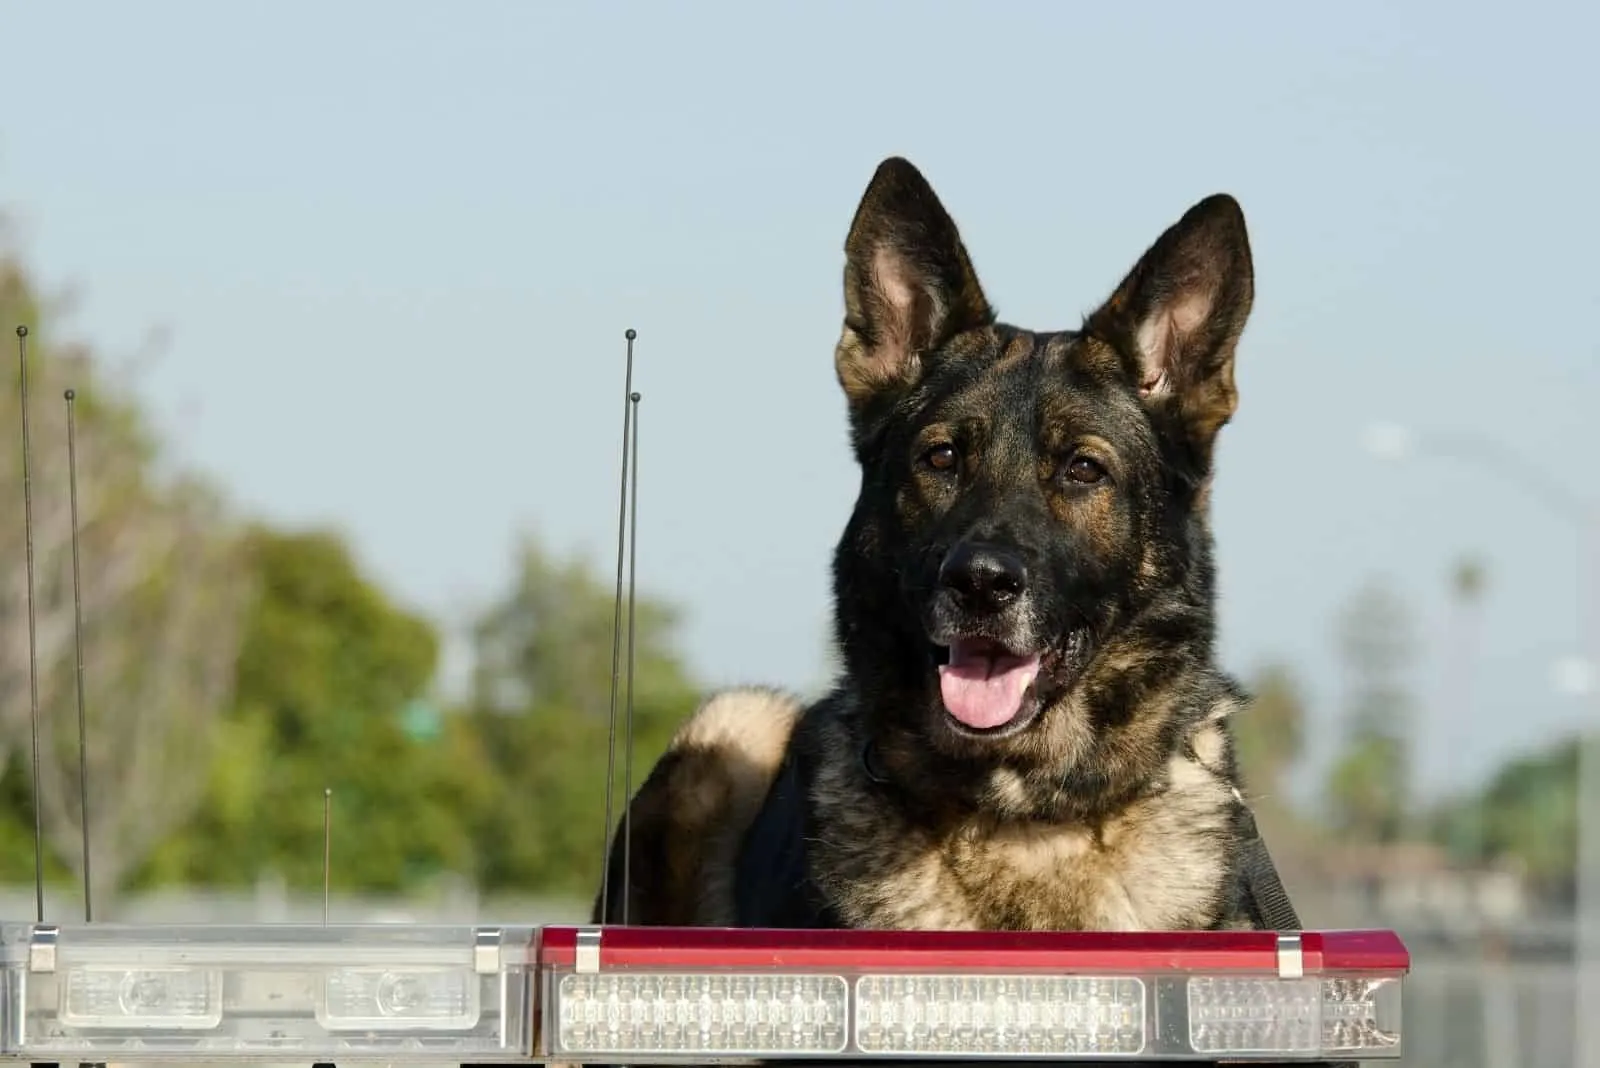 police dog sitting on top of a patrol car during his shift